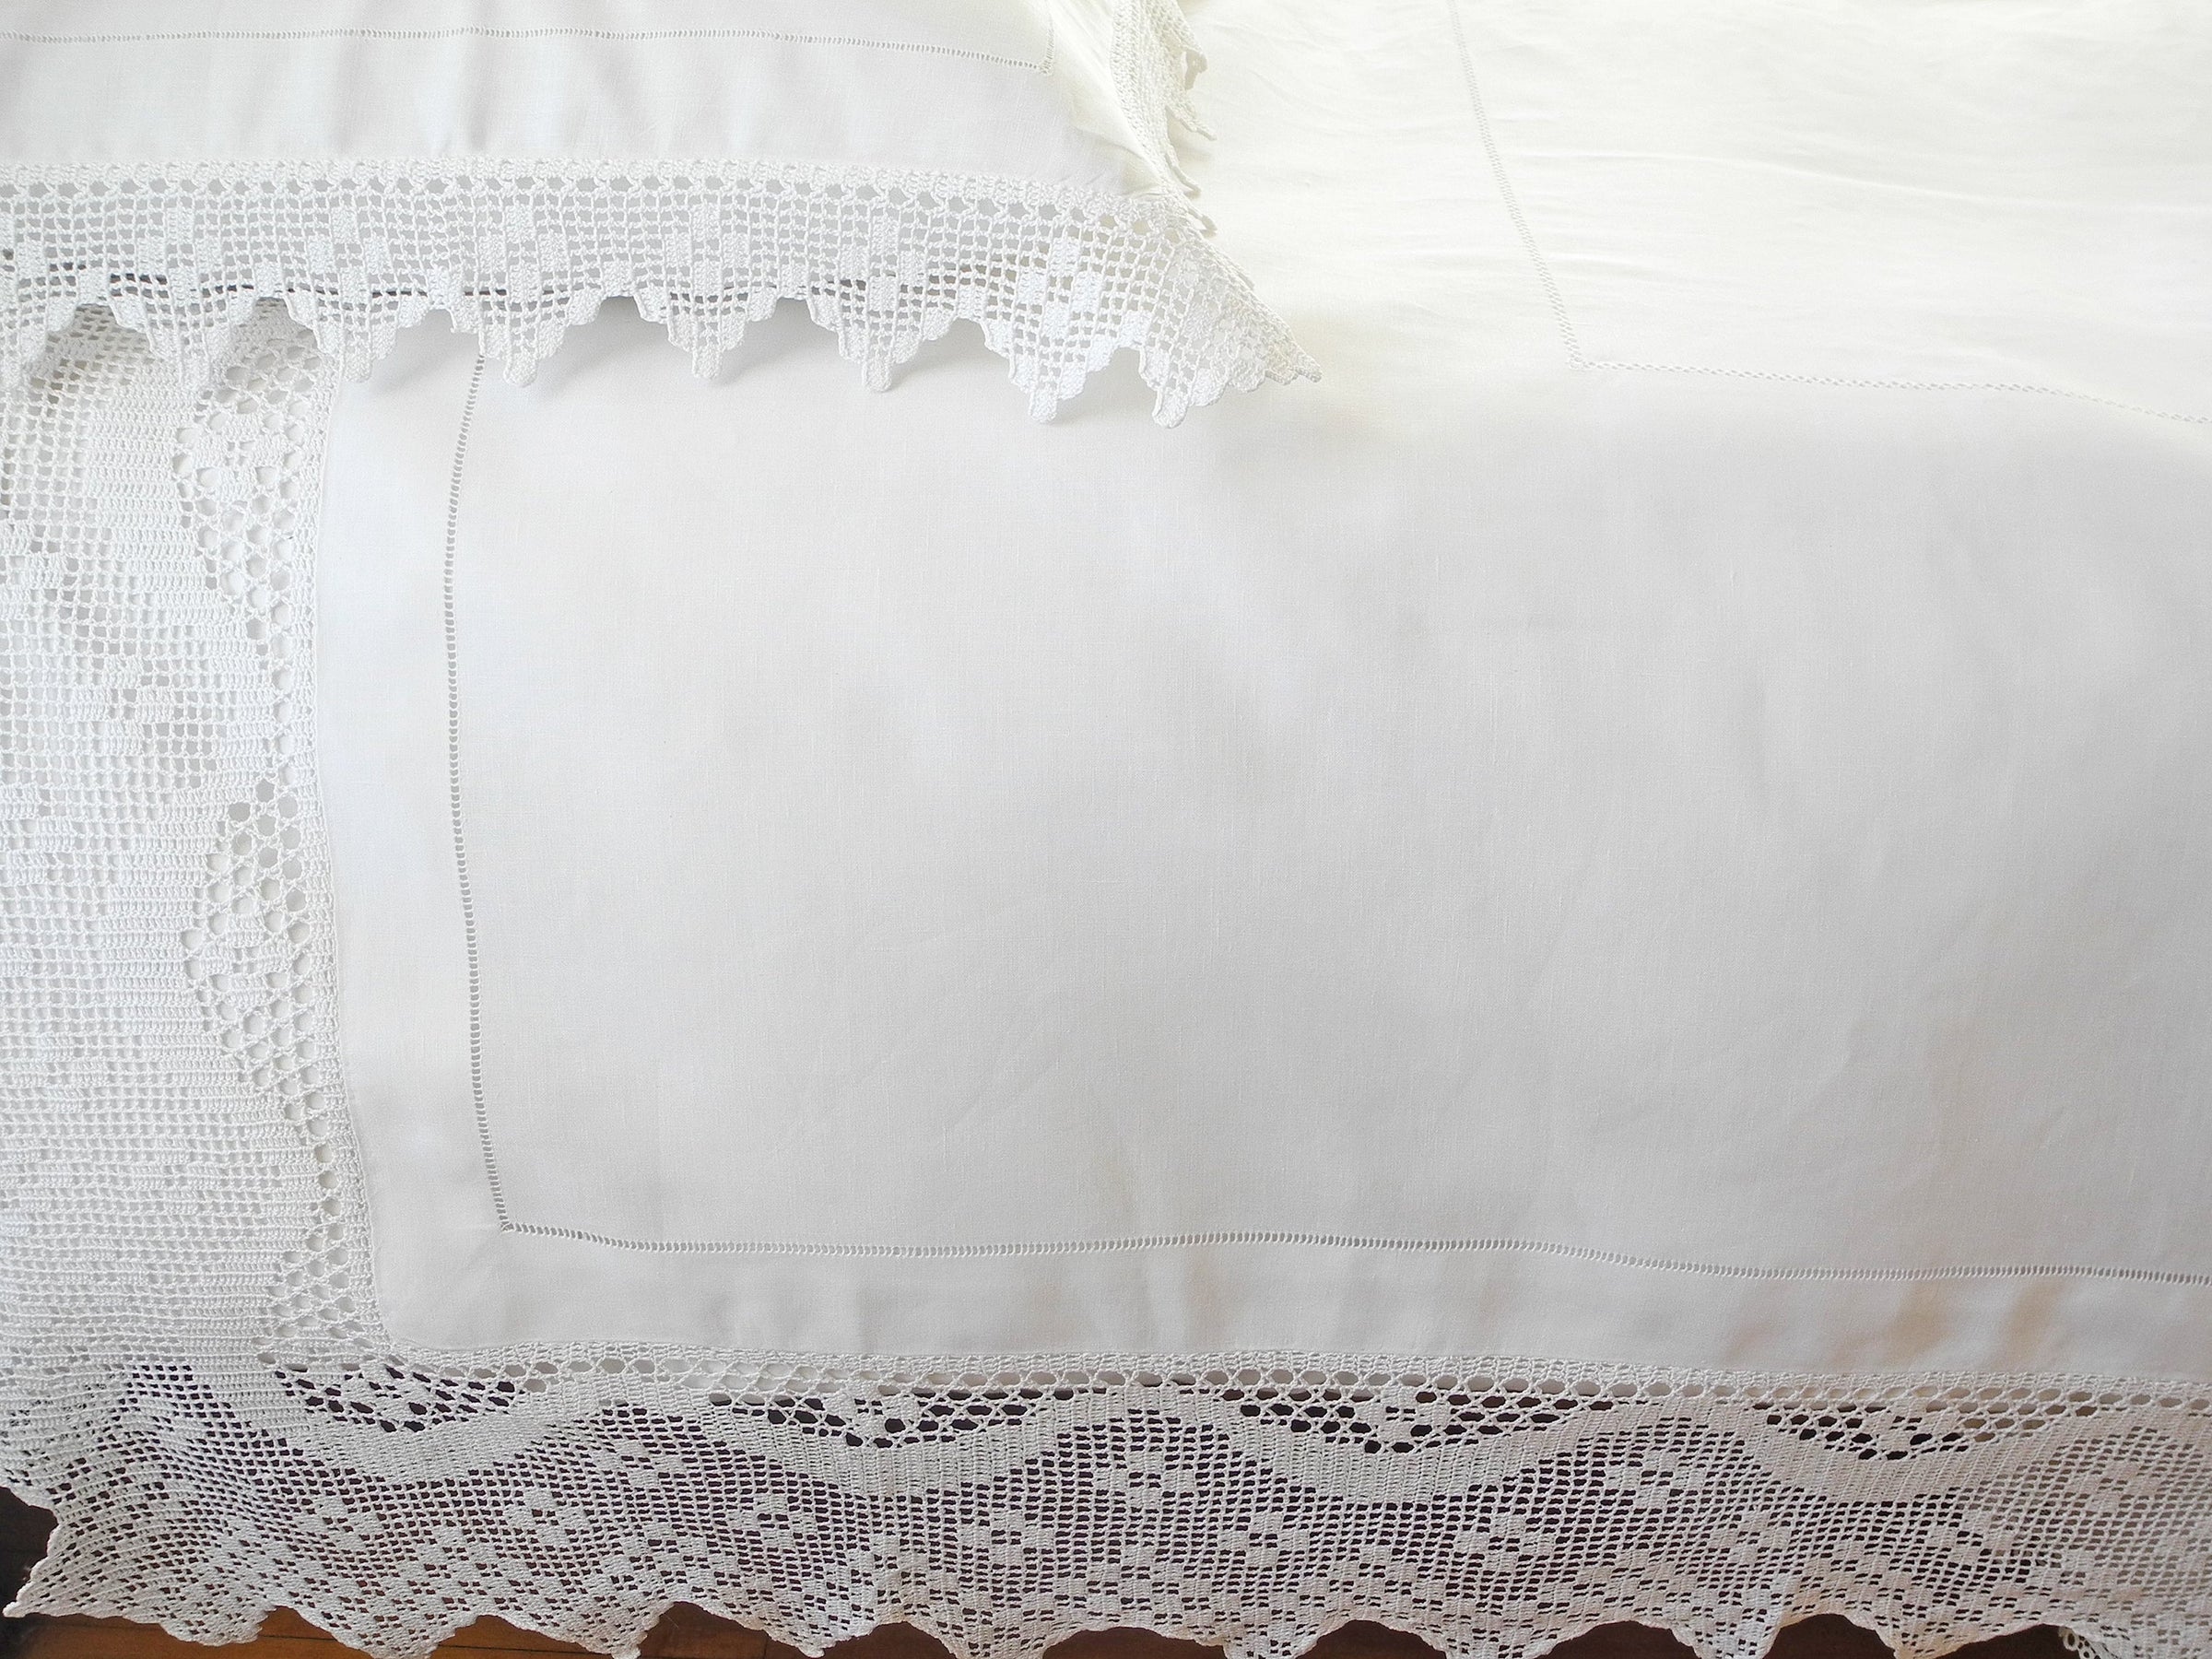 Handcrafted Antique Linens Collection, featuring meticulously crafted bed and table linens made from fine 100% linen. French Country-inspired design adds charm and elegance to any home decor.